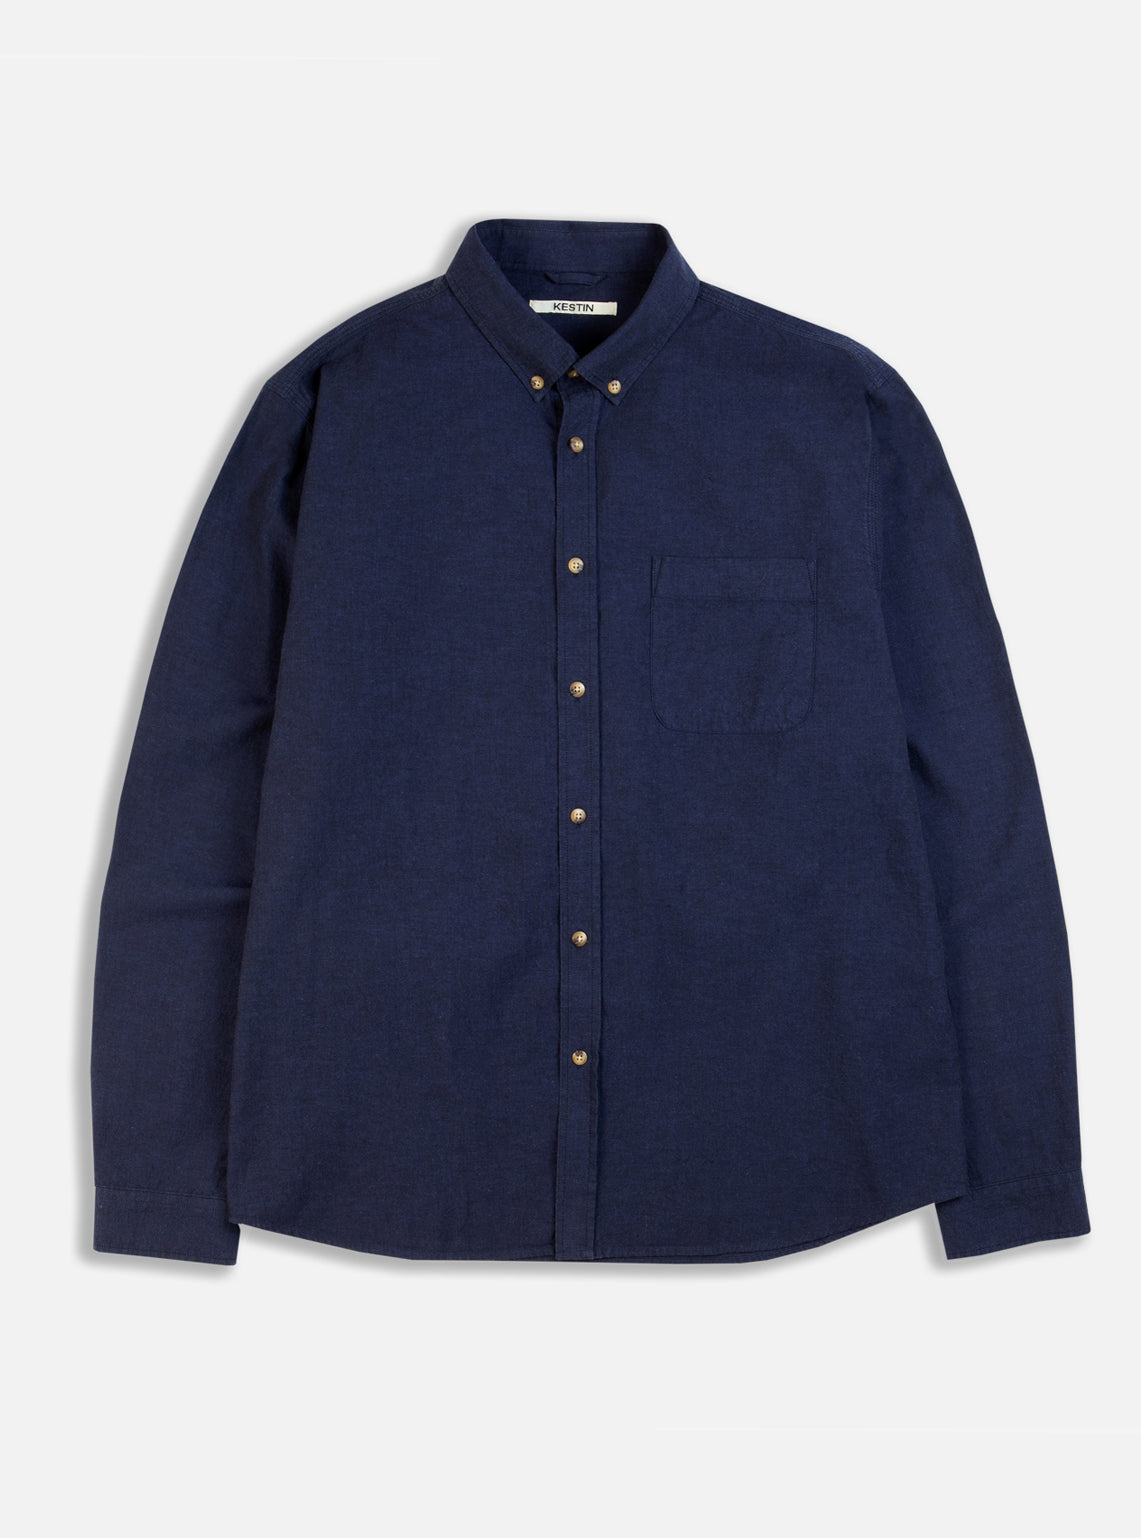 A Button Down Shirt, made from a classic Oxford weave in a Dark Navy Blue.